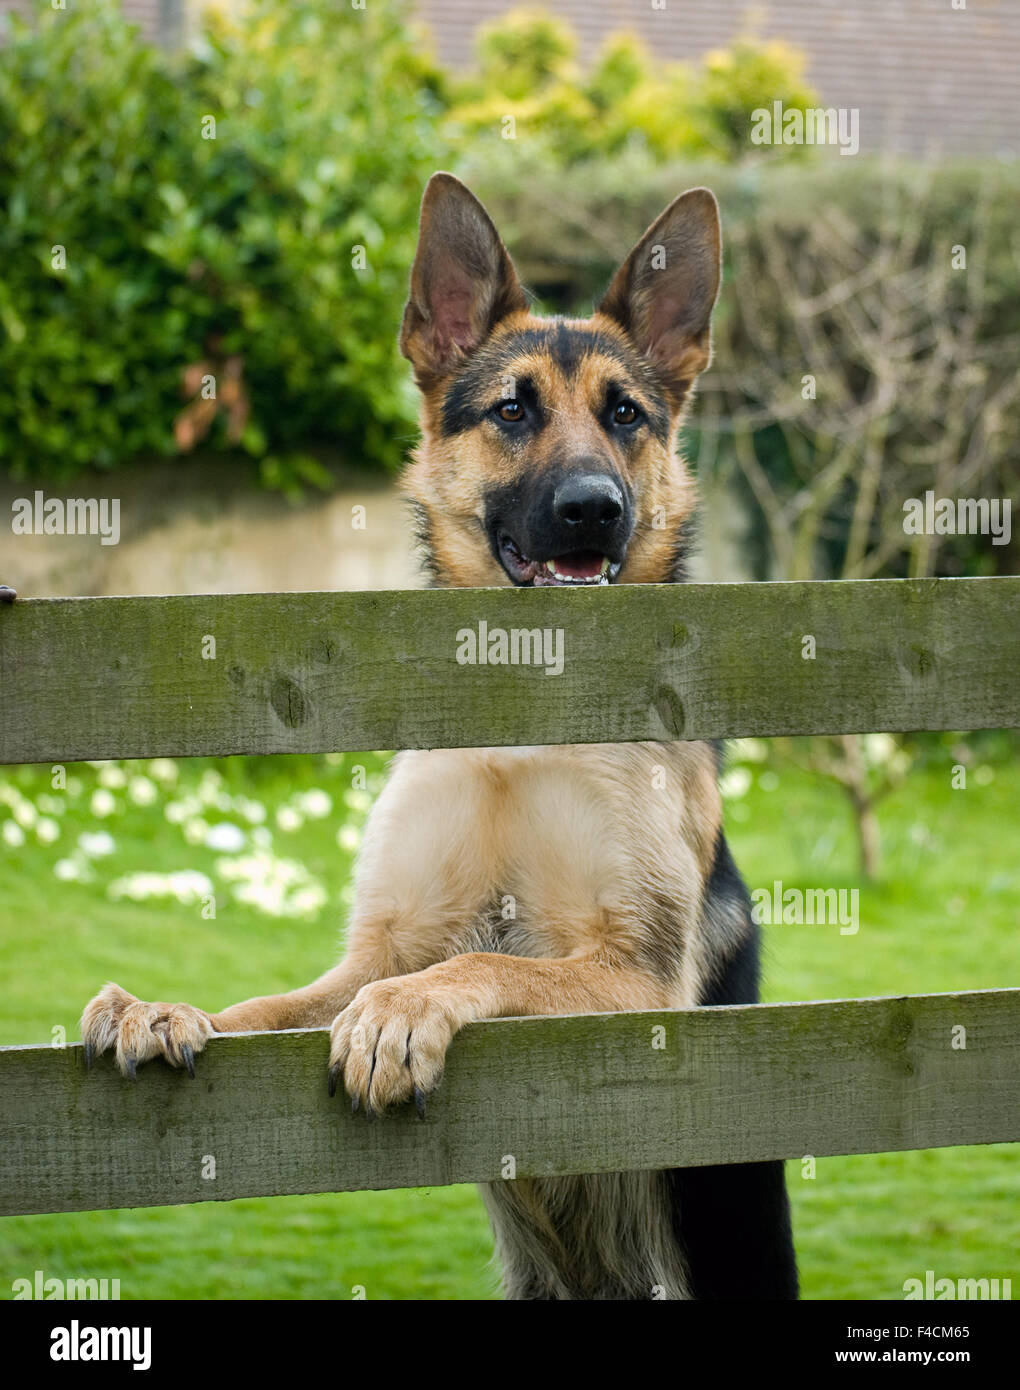 Watchful German Shepherd Dog standing by the Fence. Stock Photo